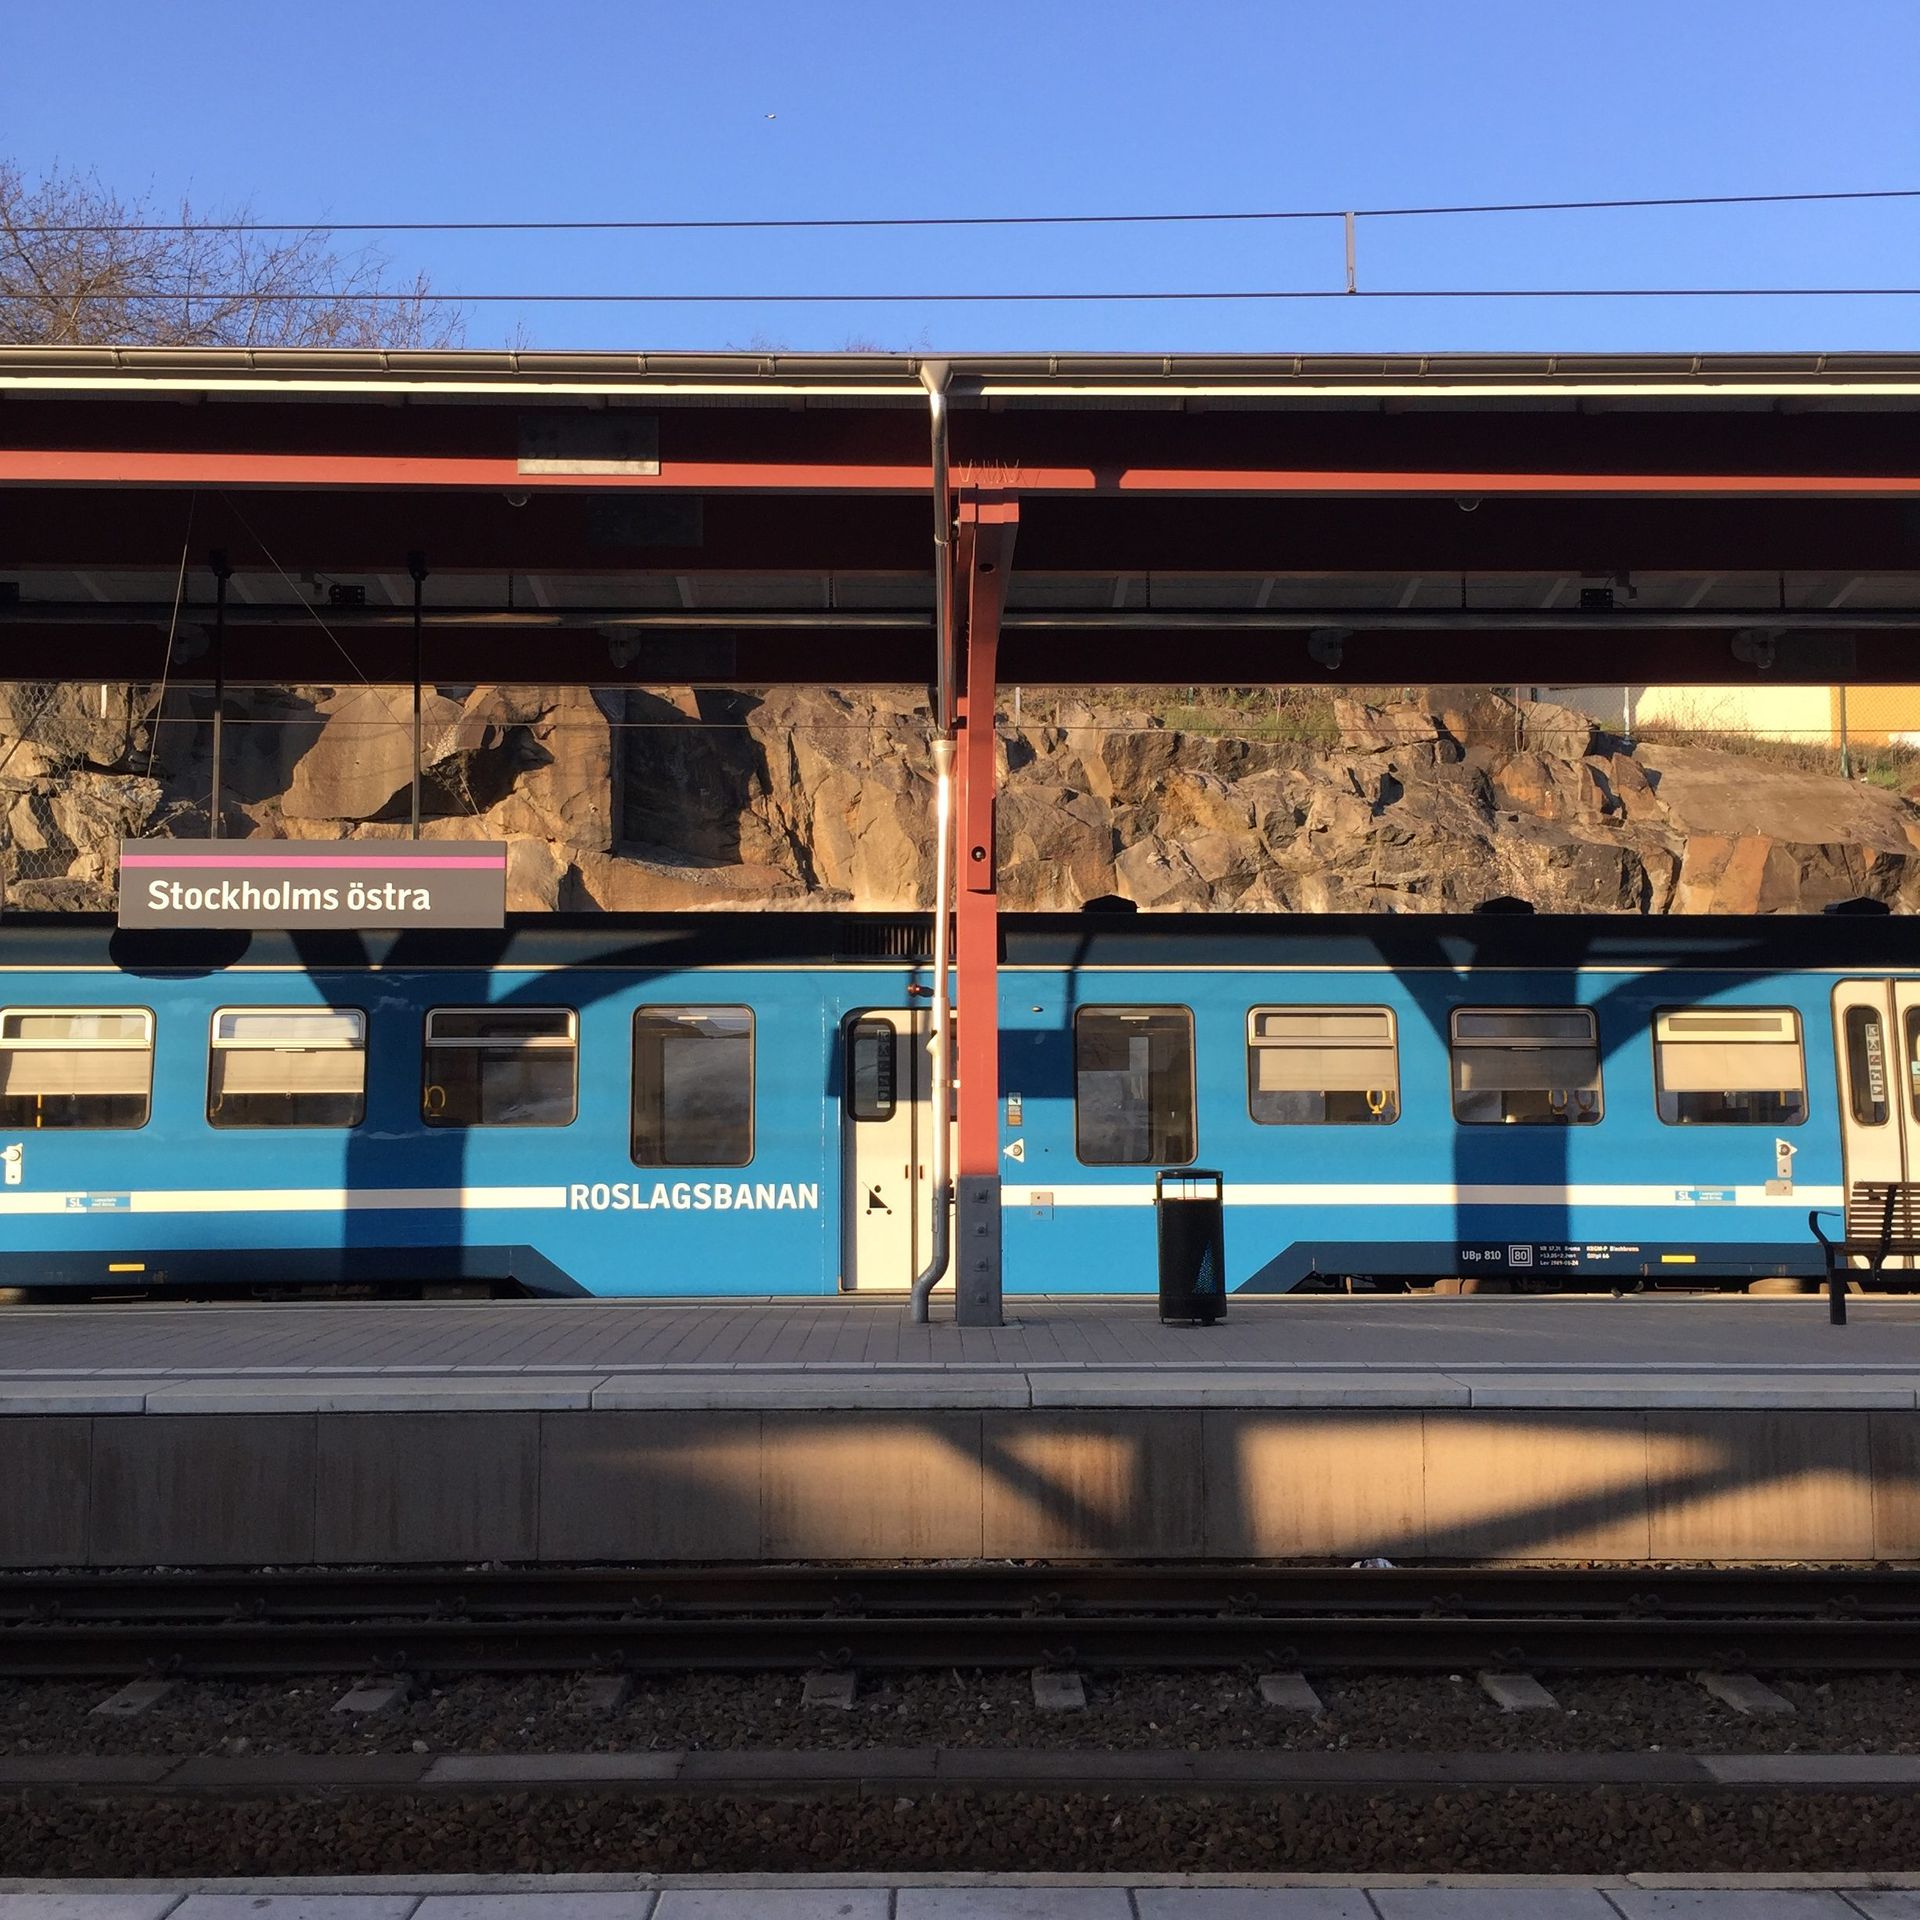 A train in Stockholm